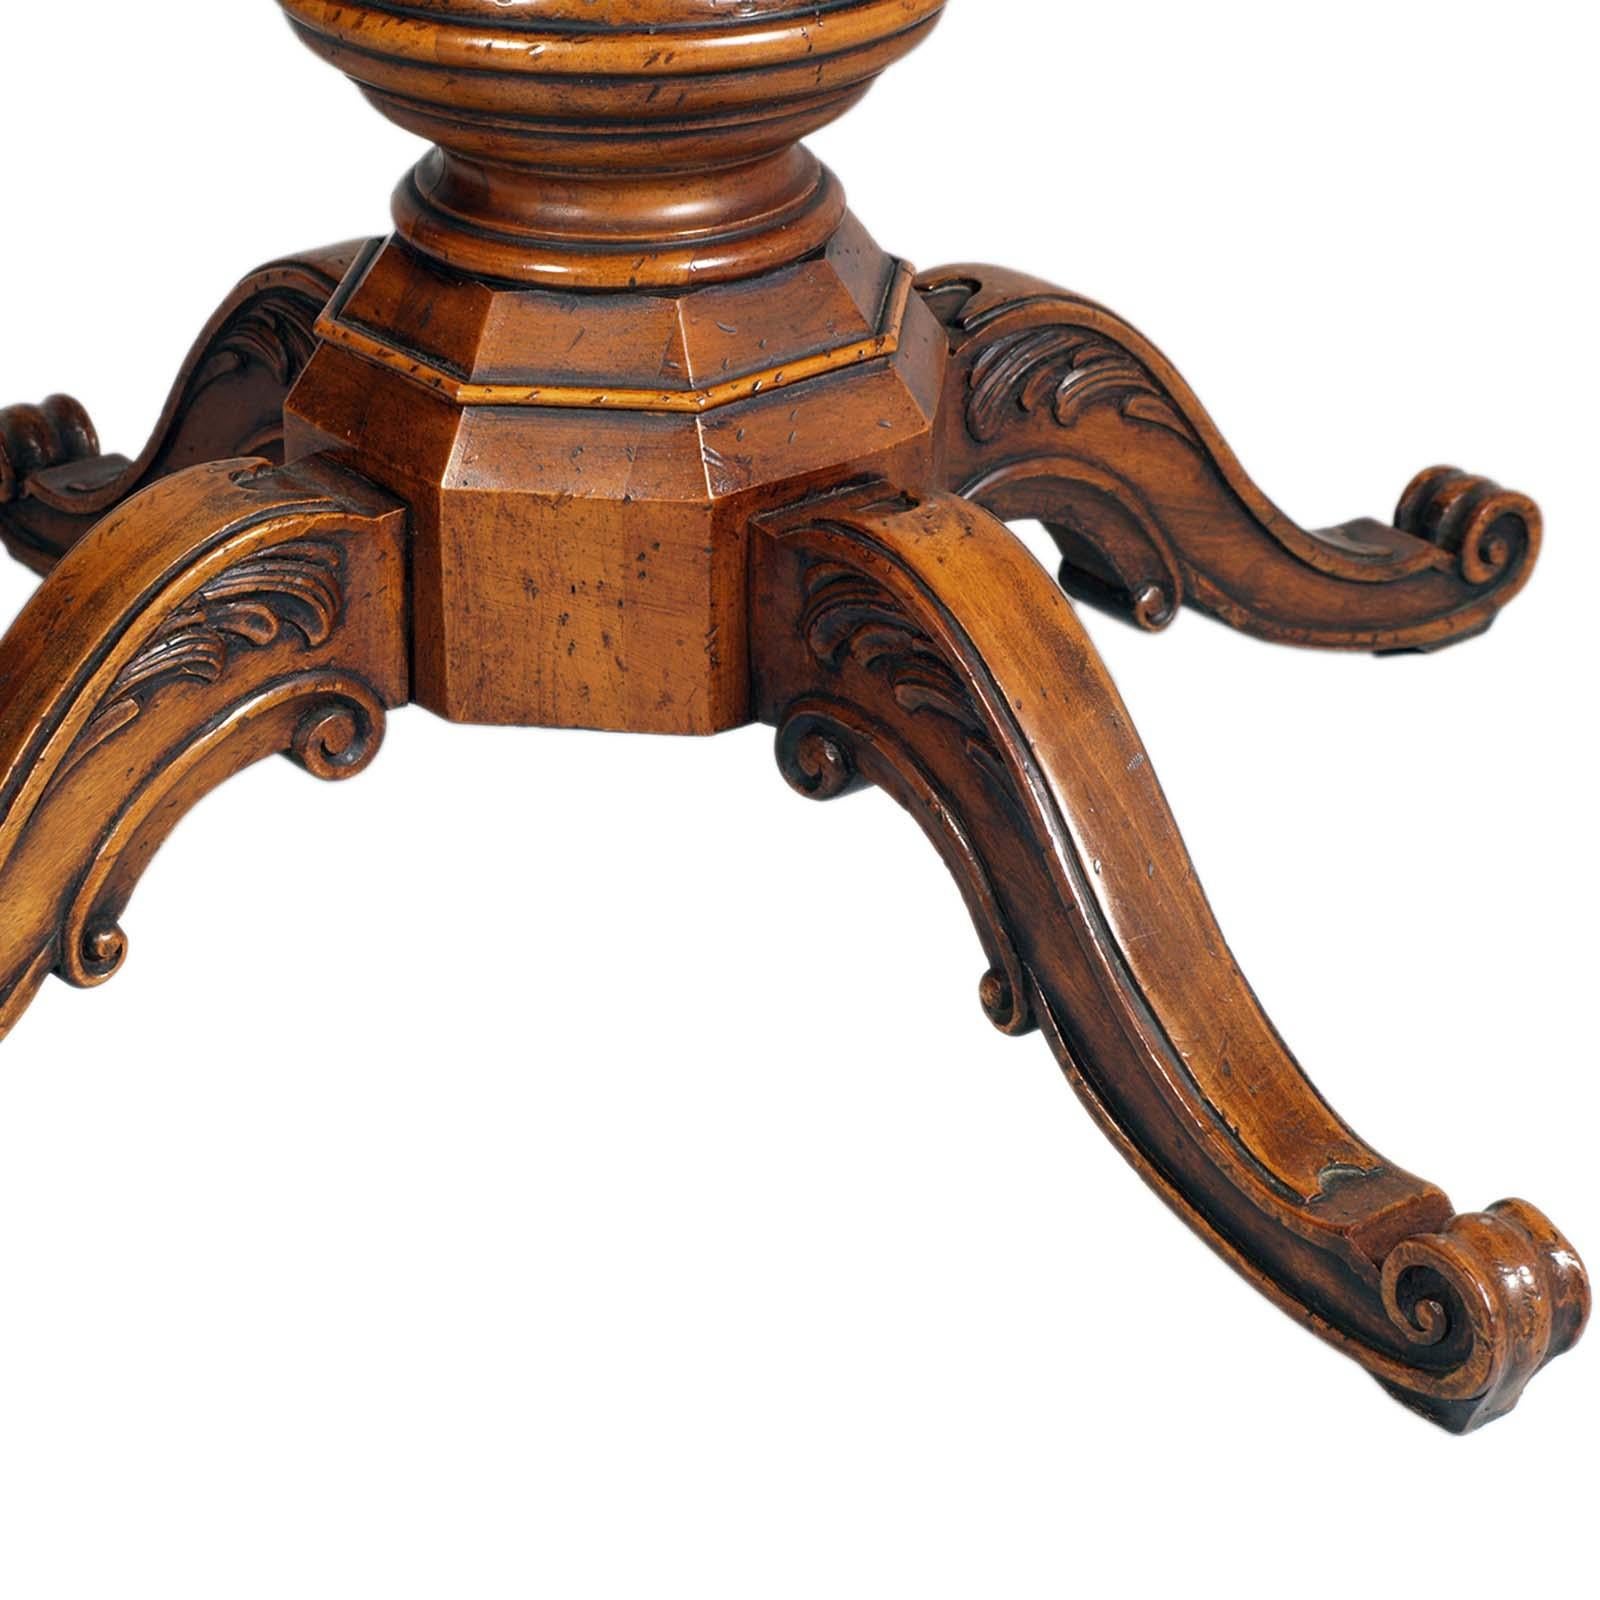  Round Baroque Table Mid 1900s Top in Ferrarese Walnut Root and Central Inlay In Good Condition For Sale In Vigonza, Padua